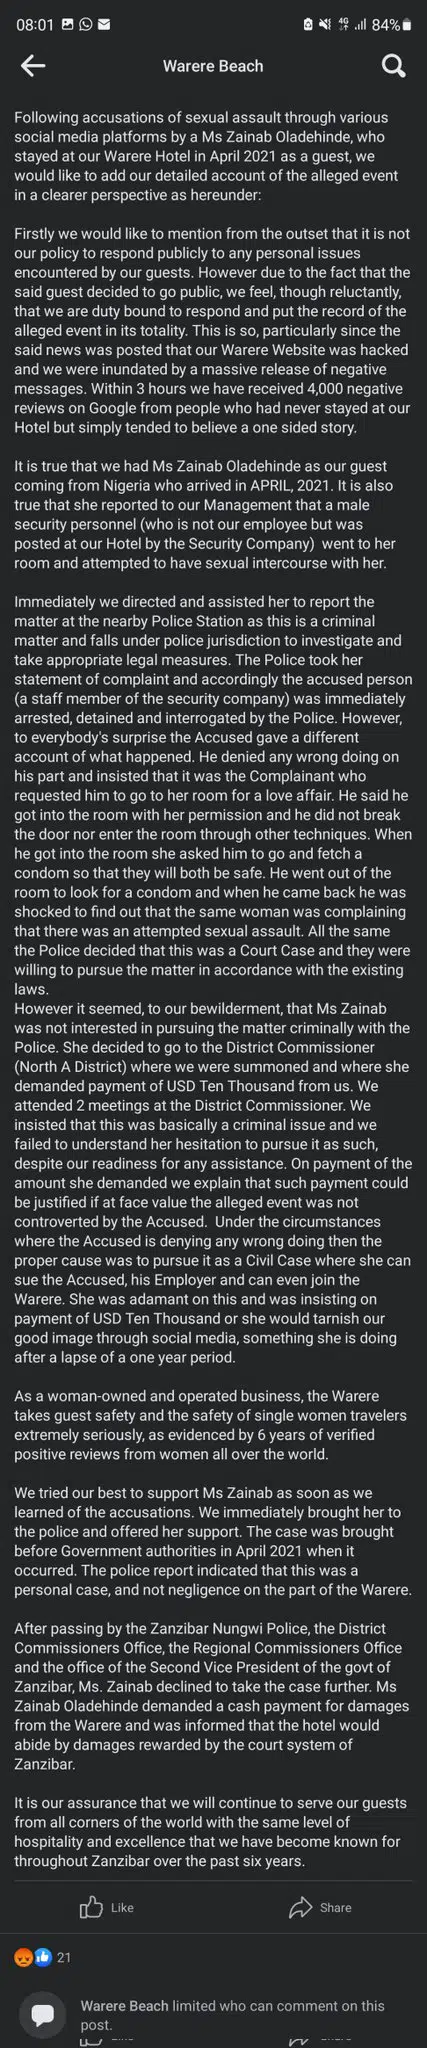 Warere hotel in Zanzibar narrates side of story with 23-year-old Nigerian lady who was assaulted on their property